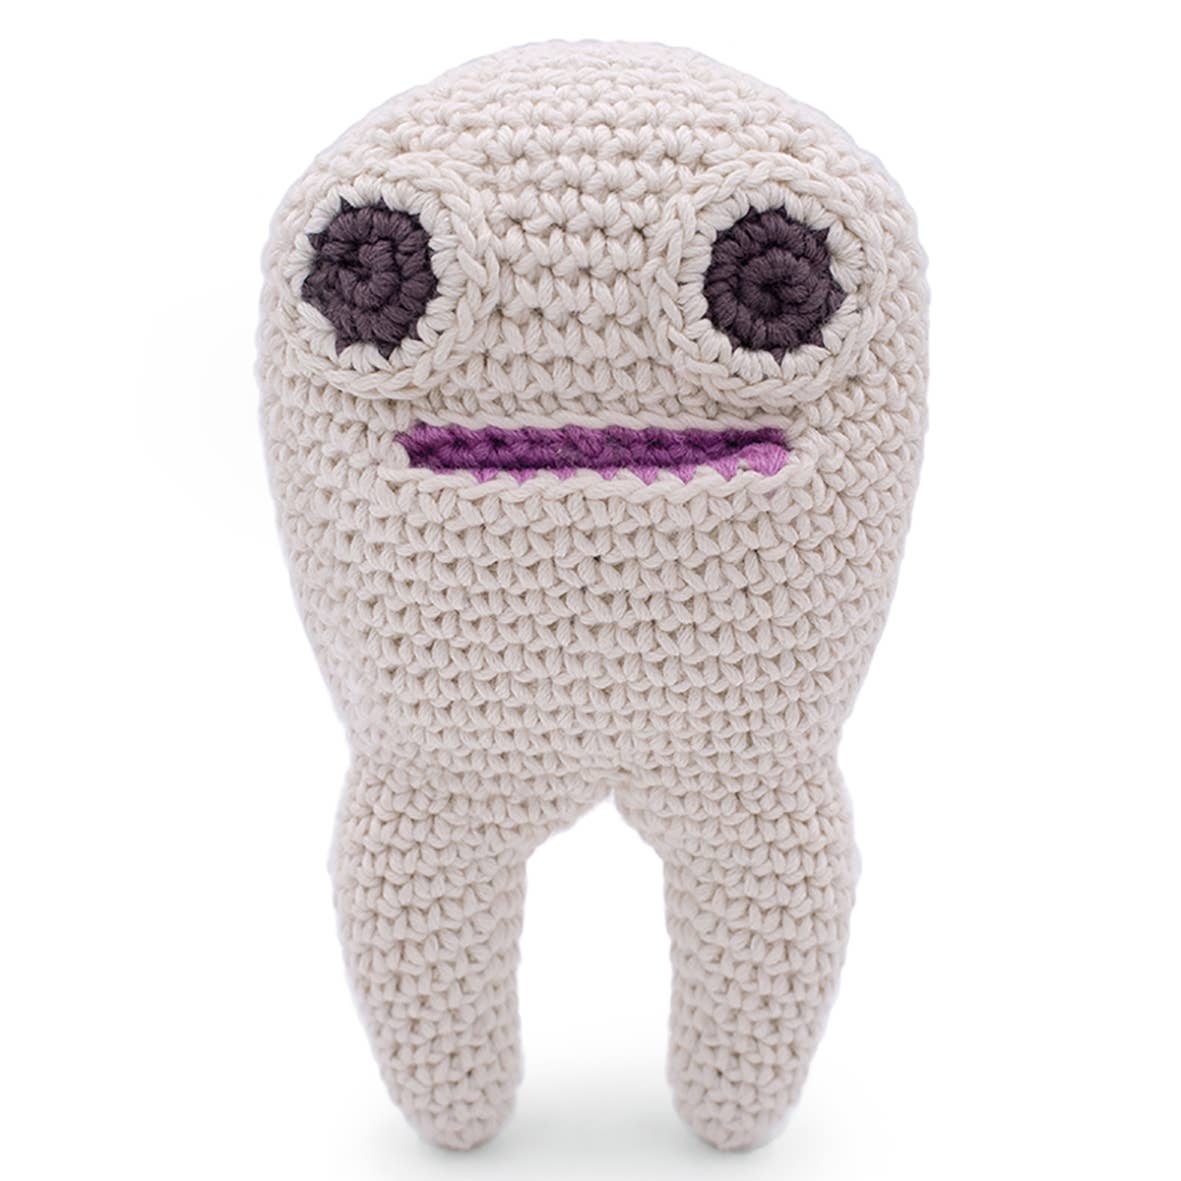 Tooth Teether and Tooth Pocket